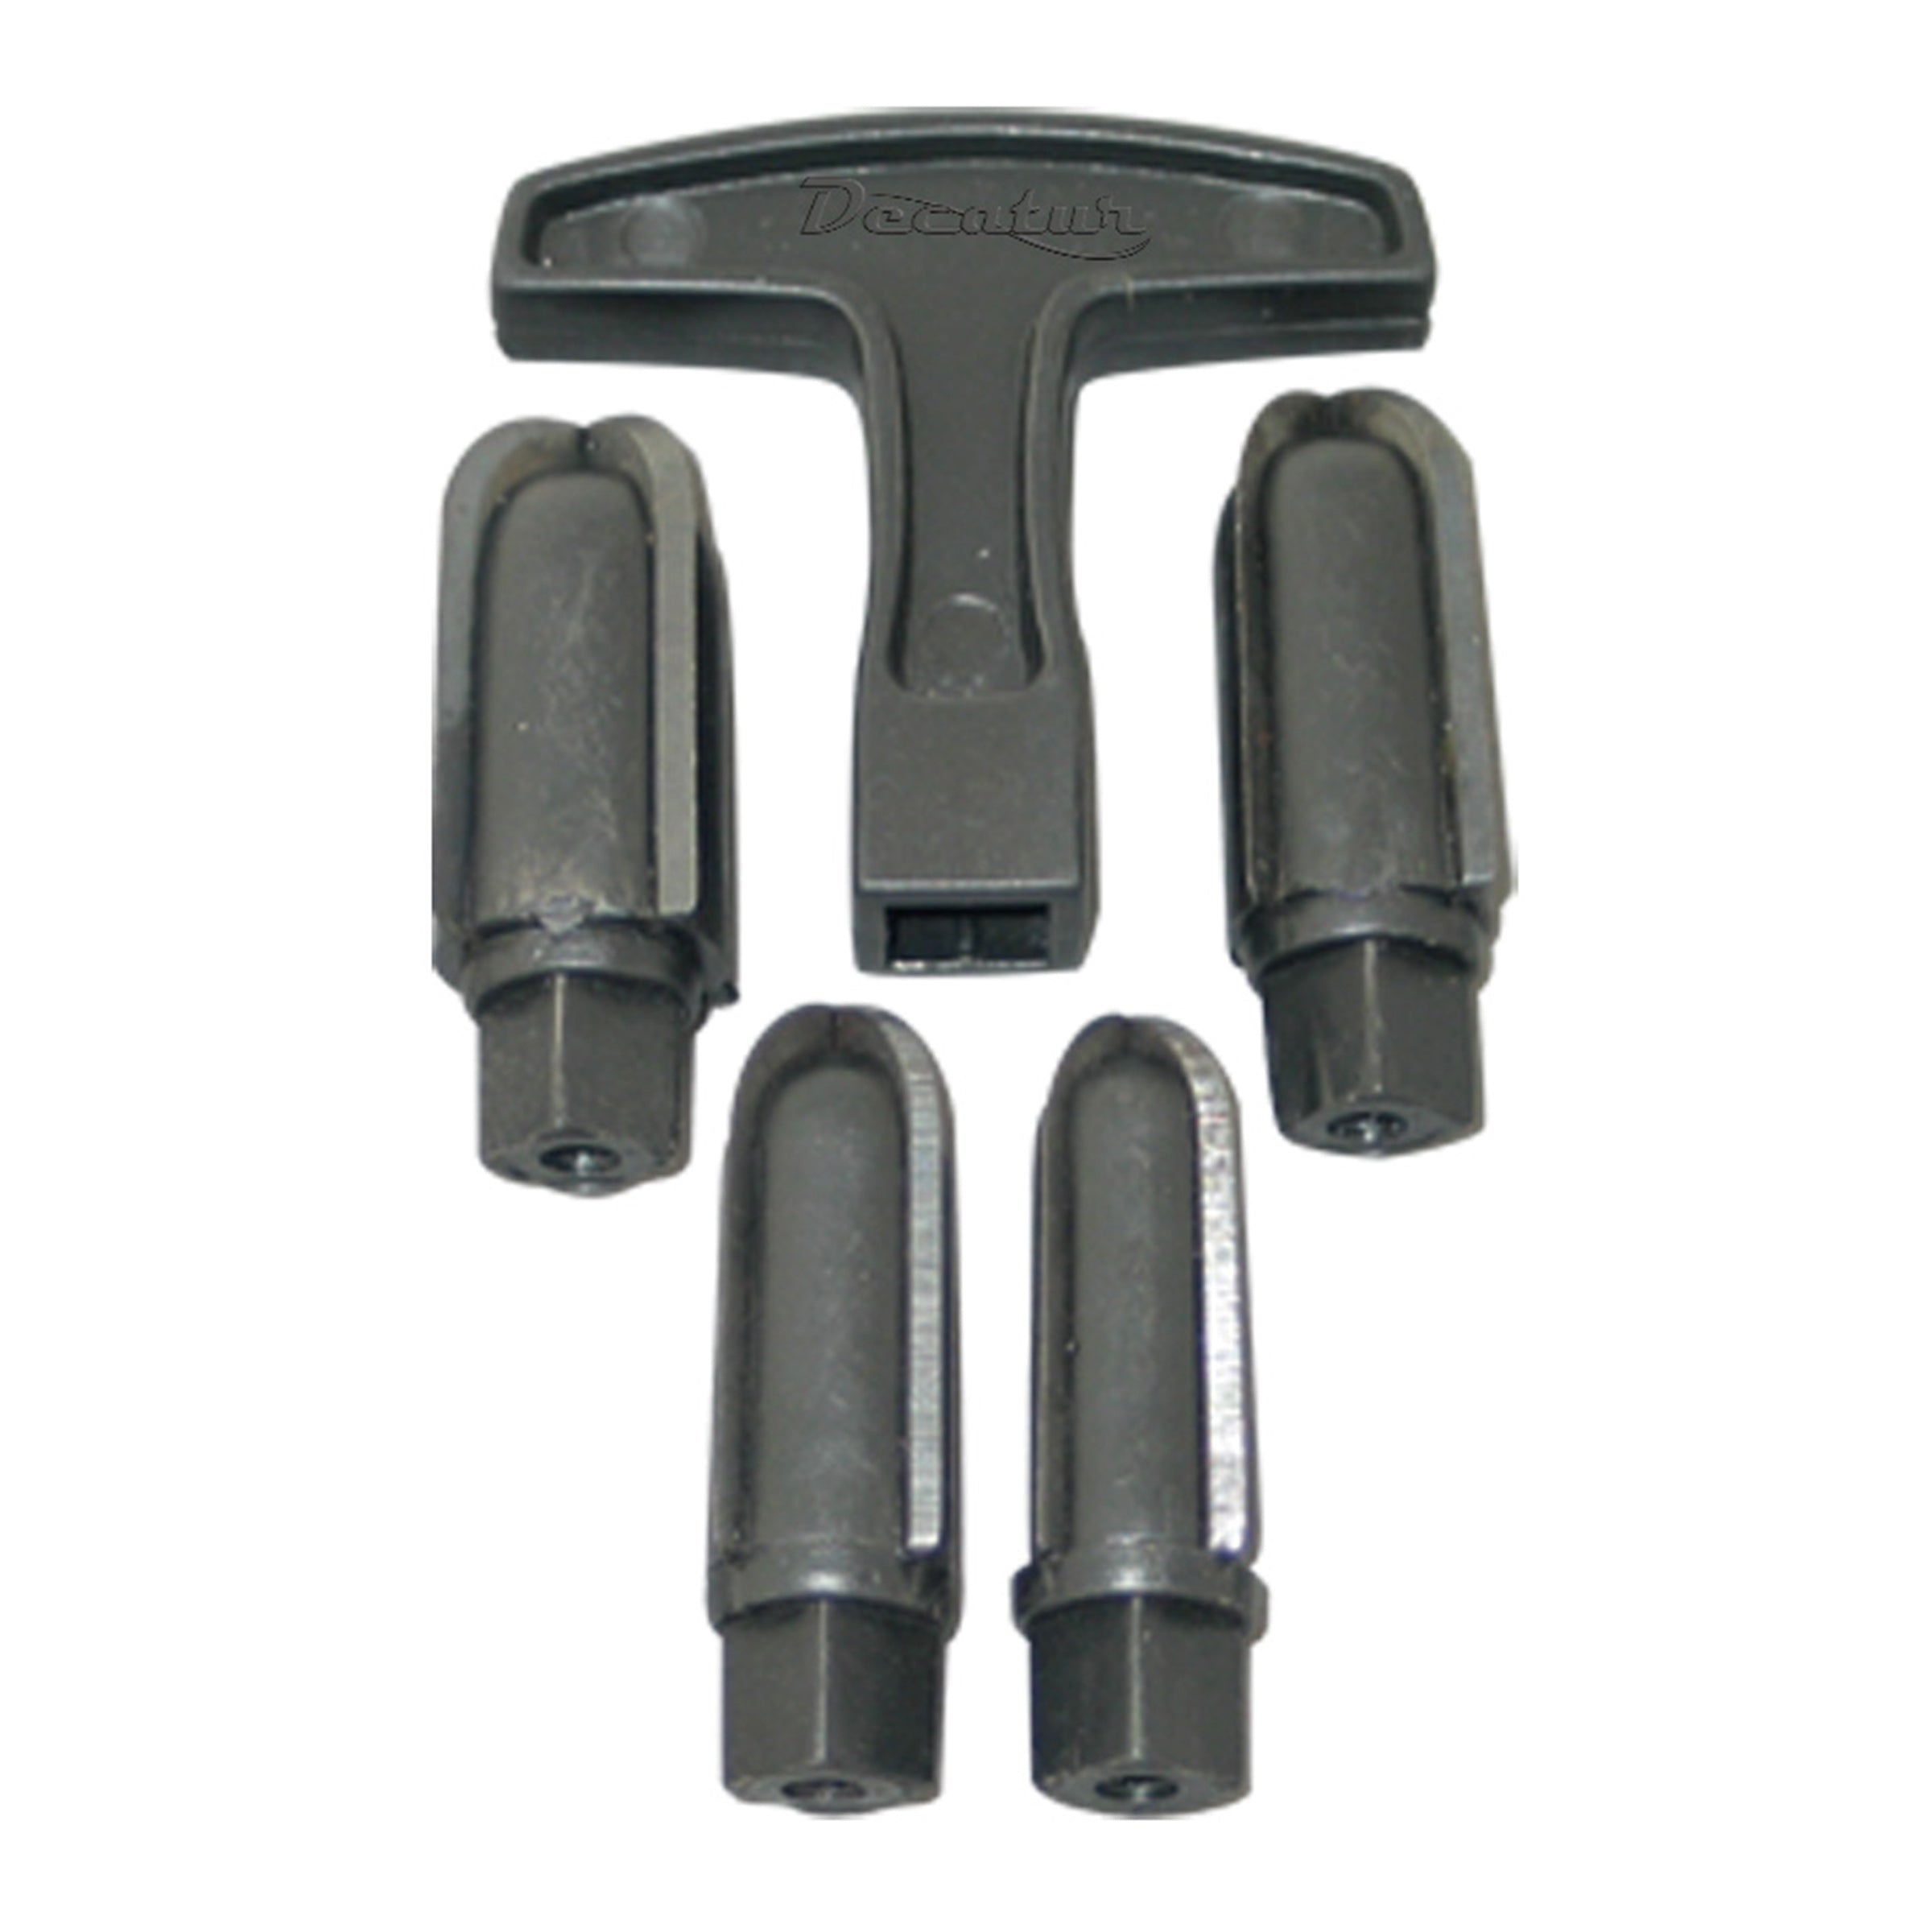 Decatur Ream-All Pipe Reamer Set